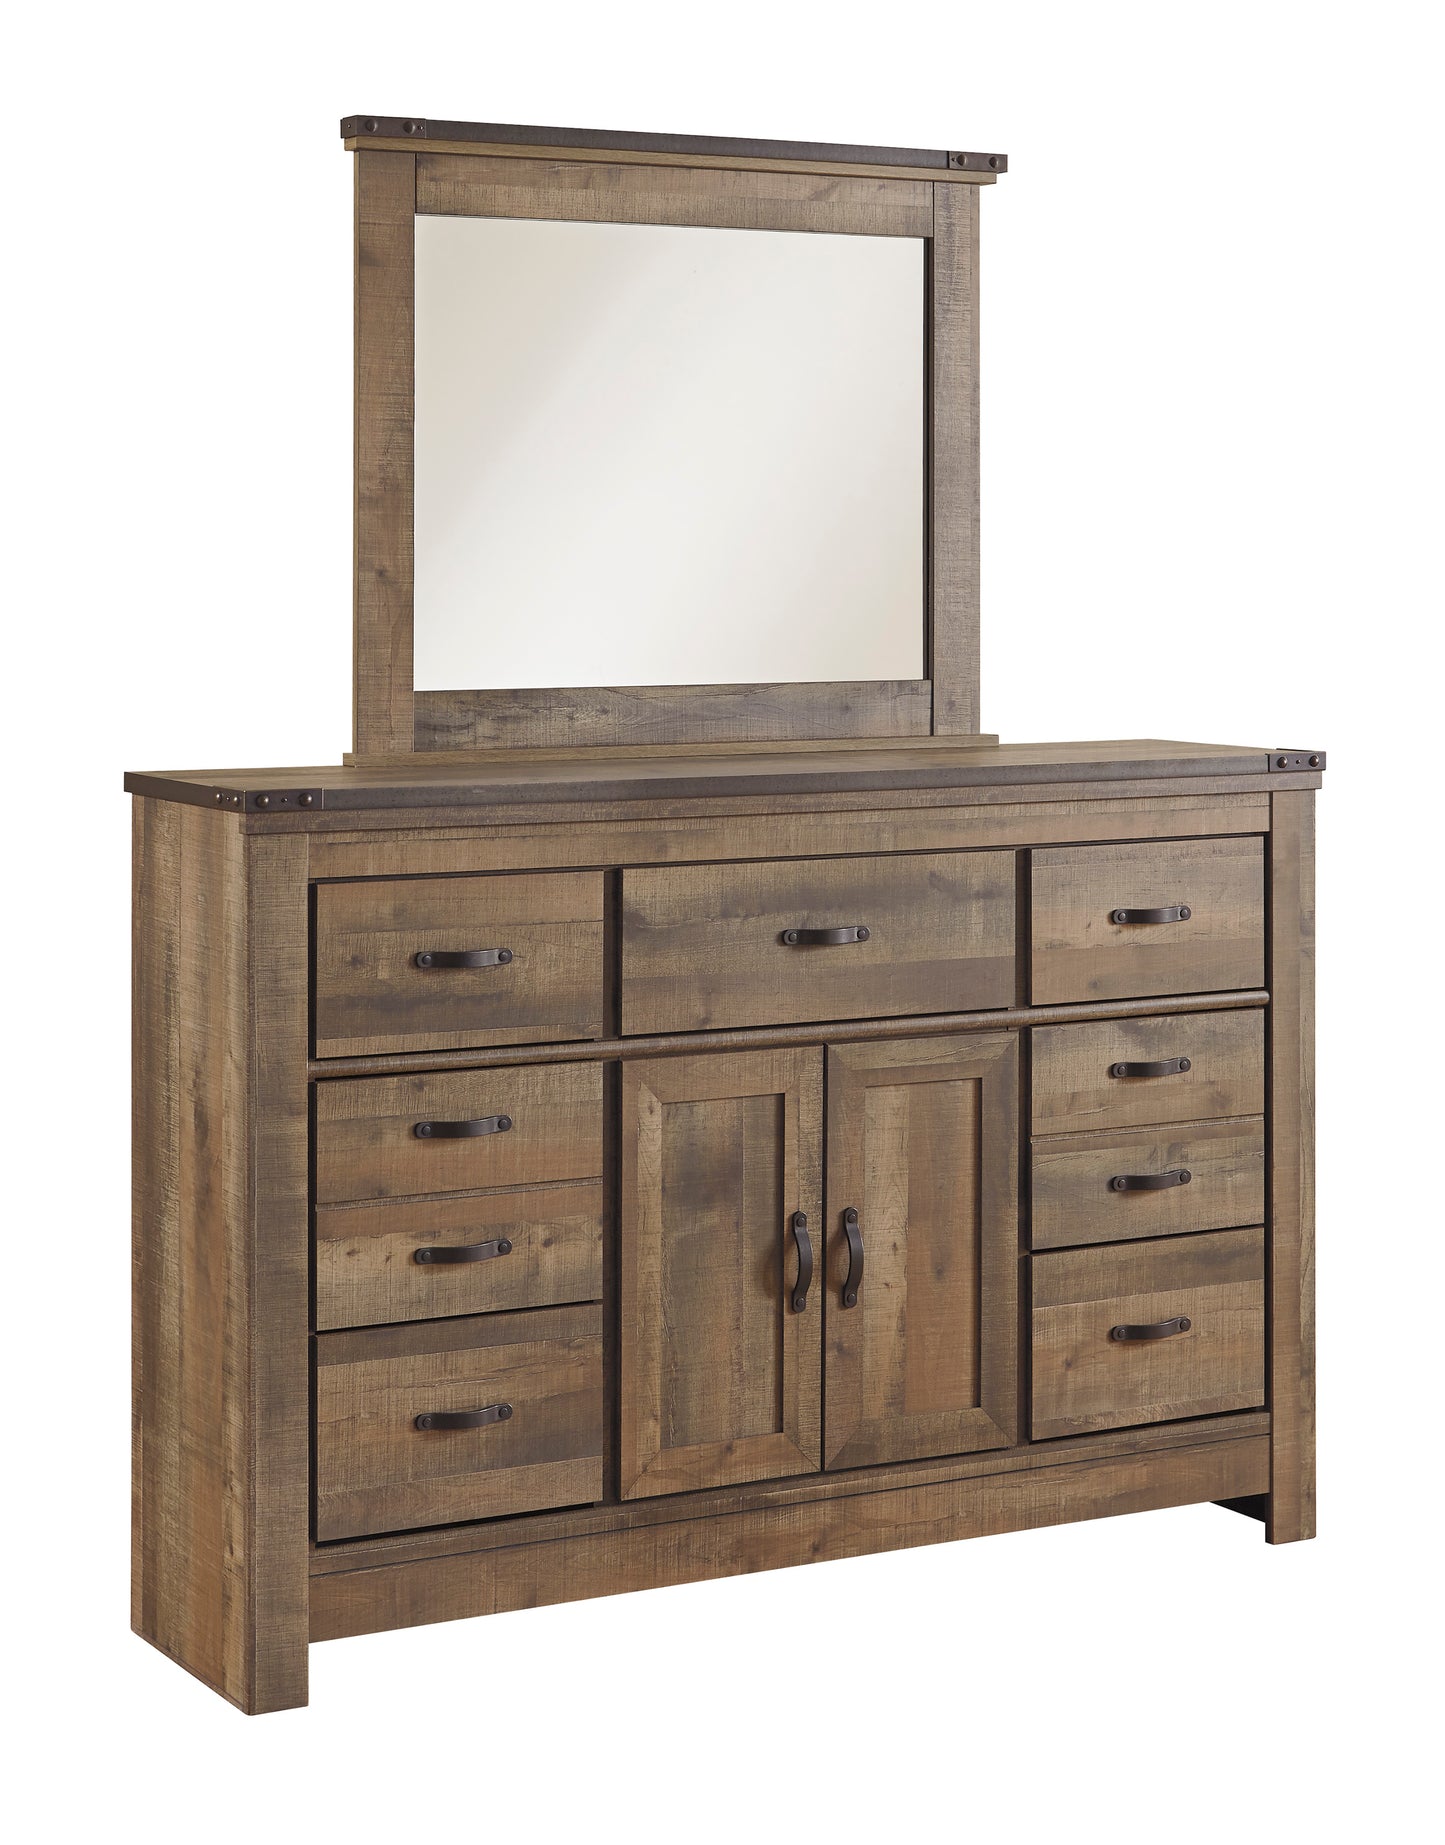 Ashley Trinell 6PC Bedroom Set E King Panel Bed Two Nightstand Dresser Mirror Chest in Brown